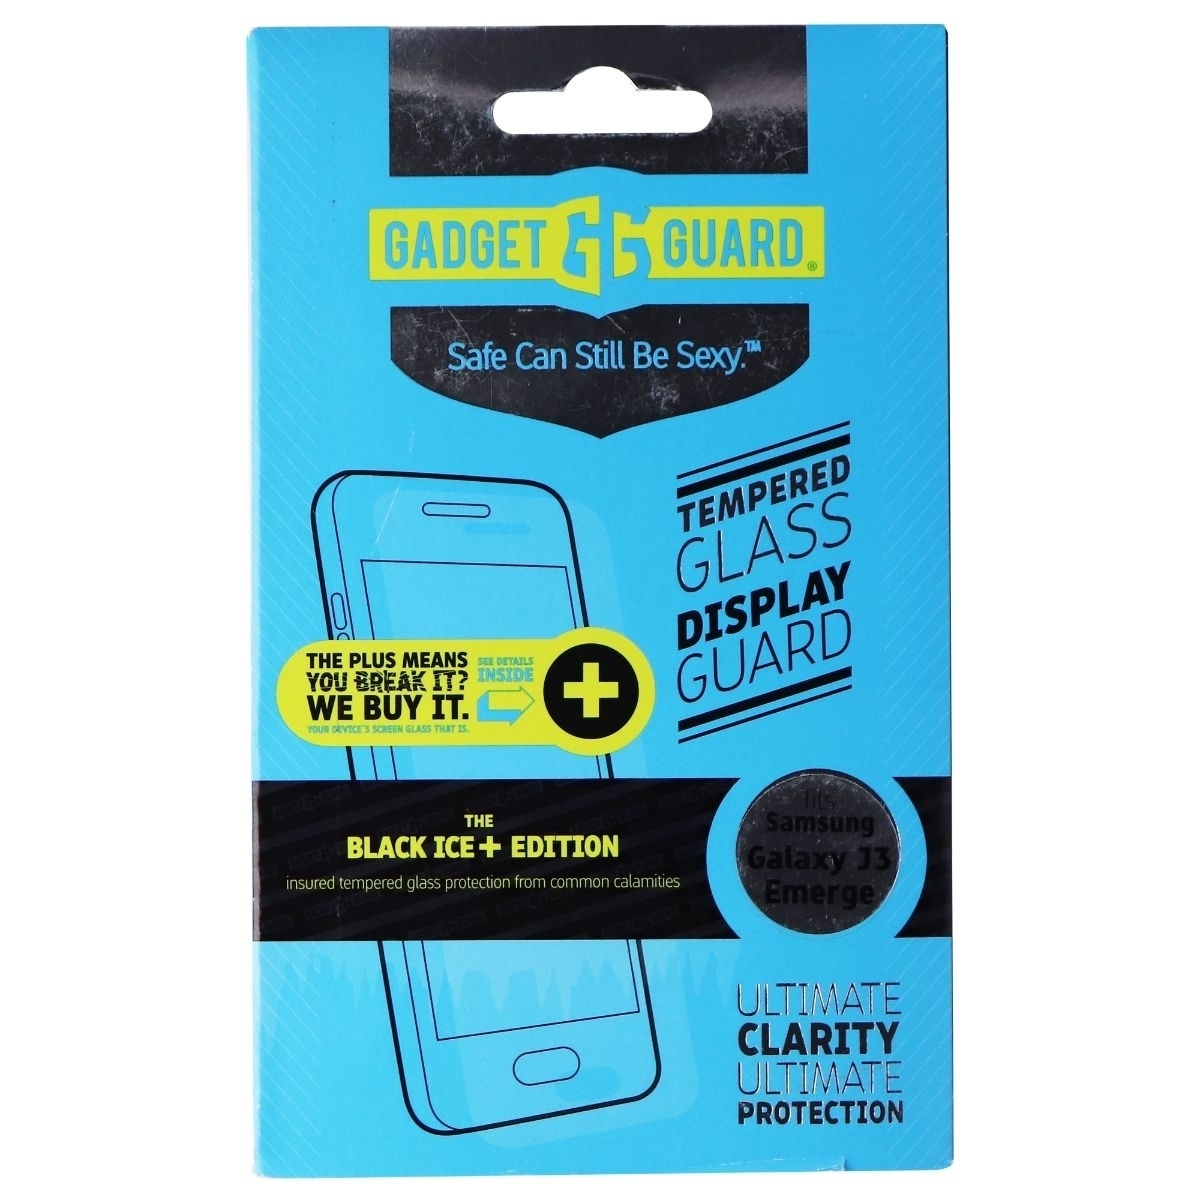 Gadget Guard Black Ice+ Edition Tempered Glass For Samsung Galaxy J3 Emerge